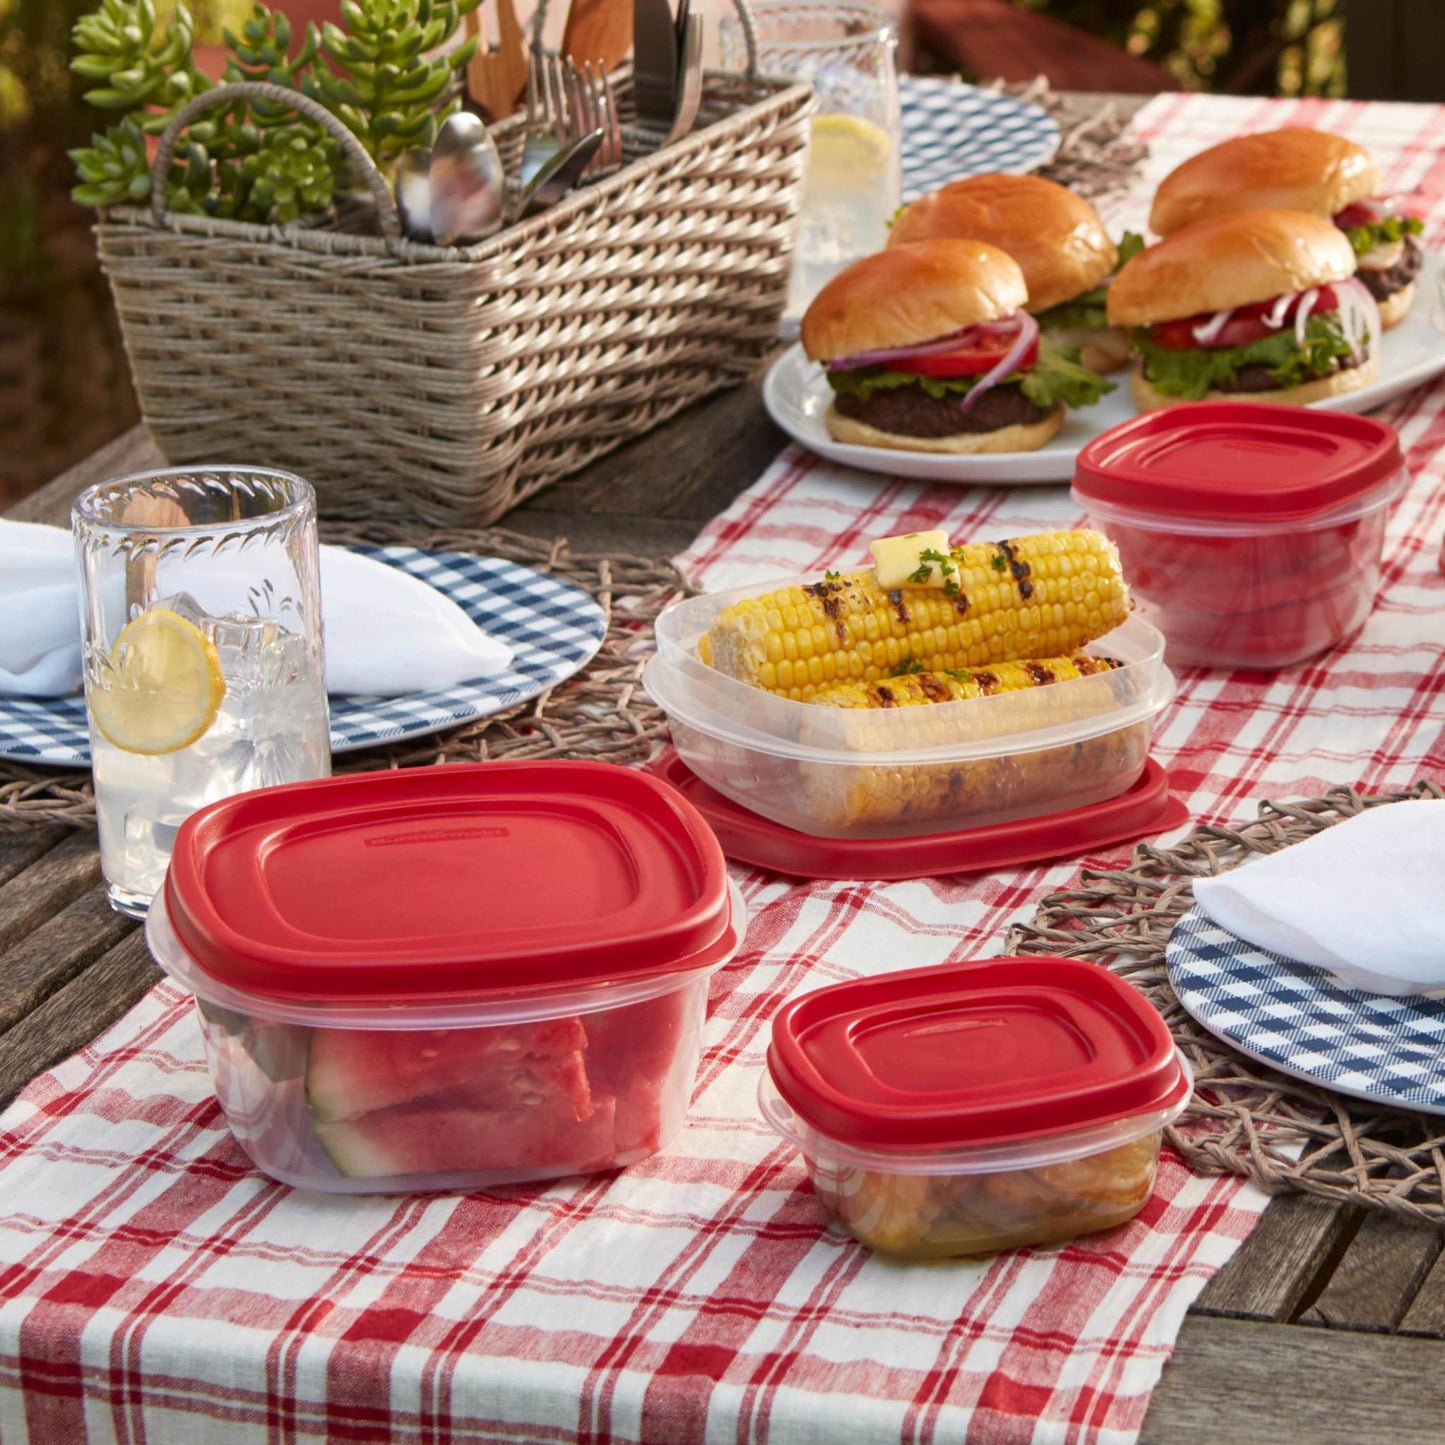 Rubbermaid, Easy Find Lids, Food Storage Containers with Vented